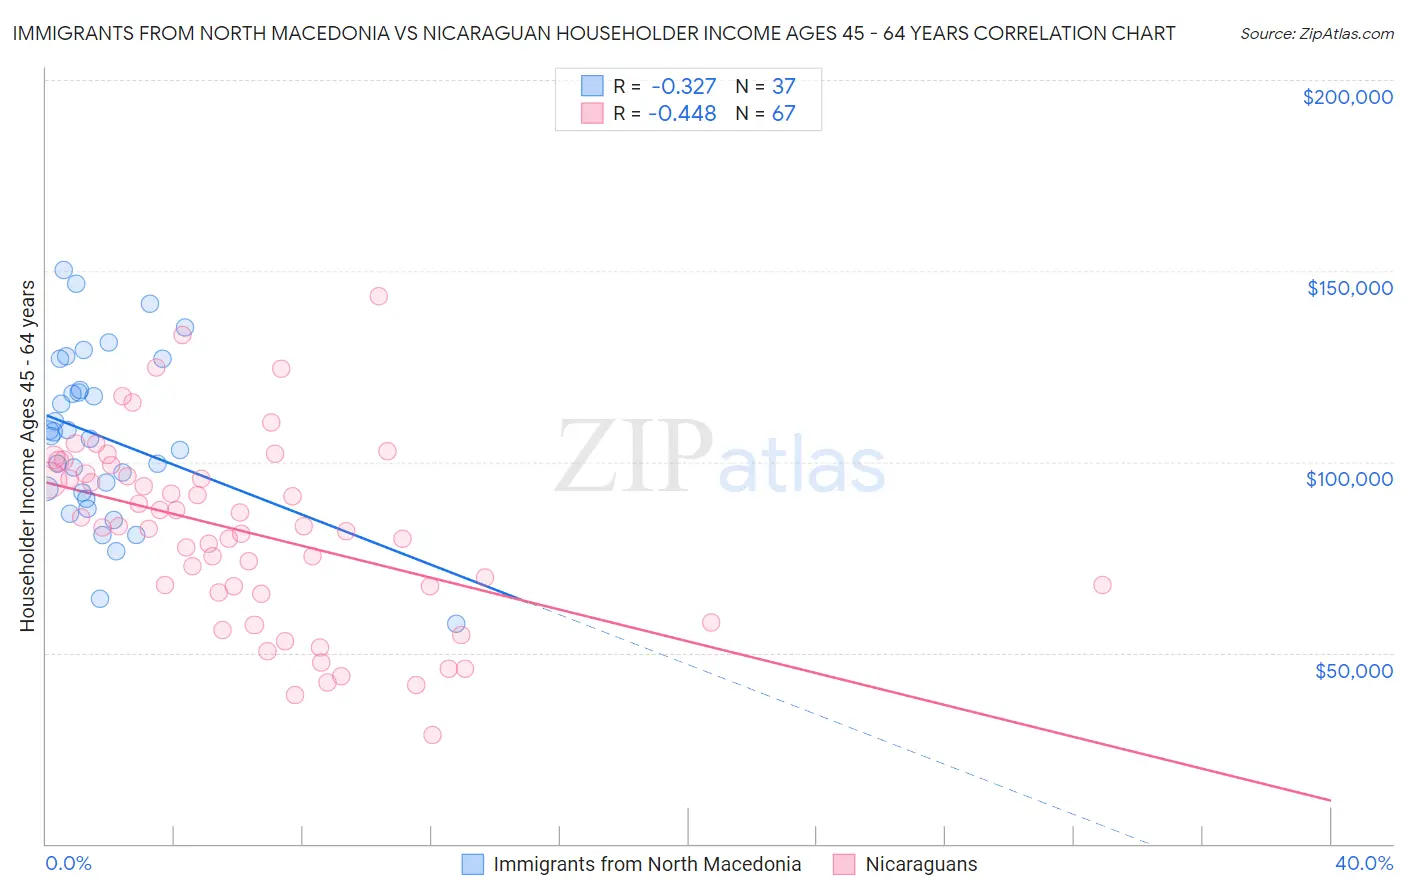 Immigrants from North Macedonia vs Nicaraguan Householder Income Ages 45 - 64 years